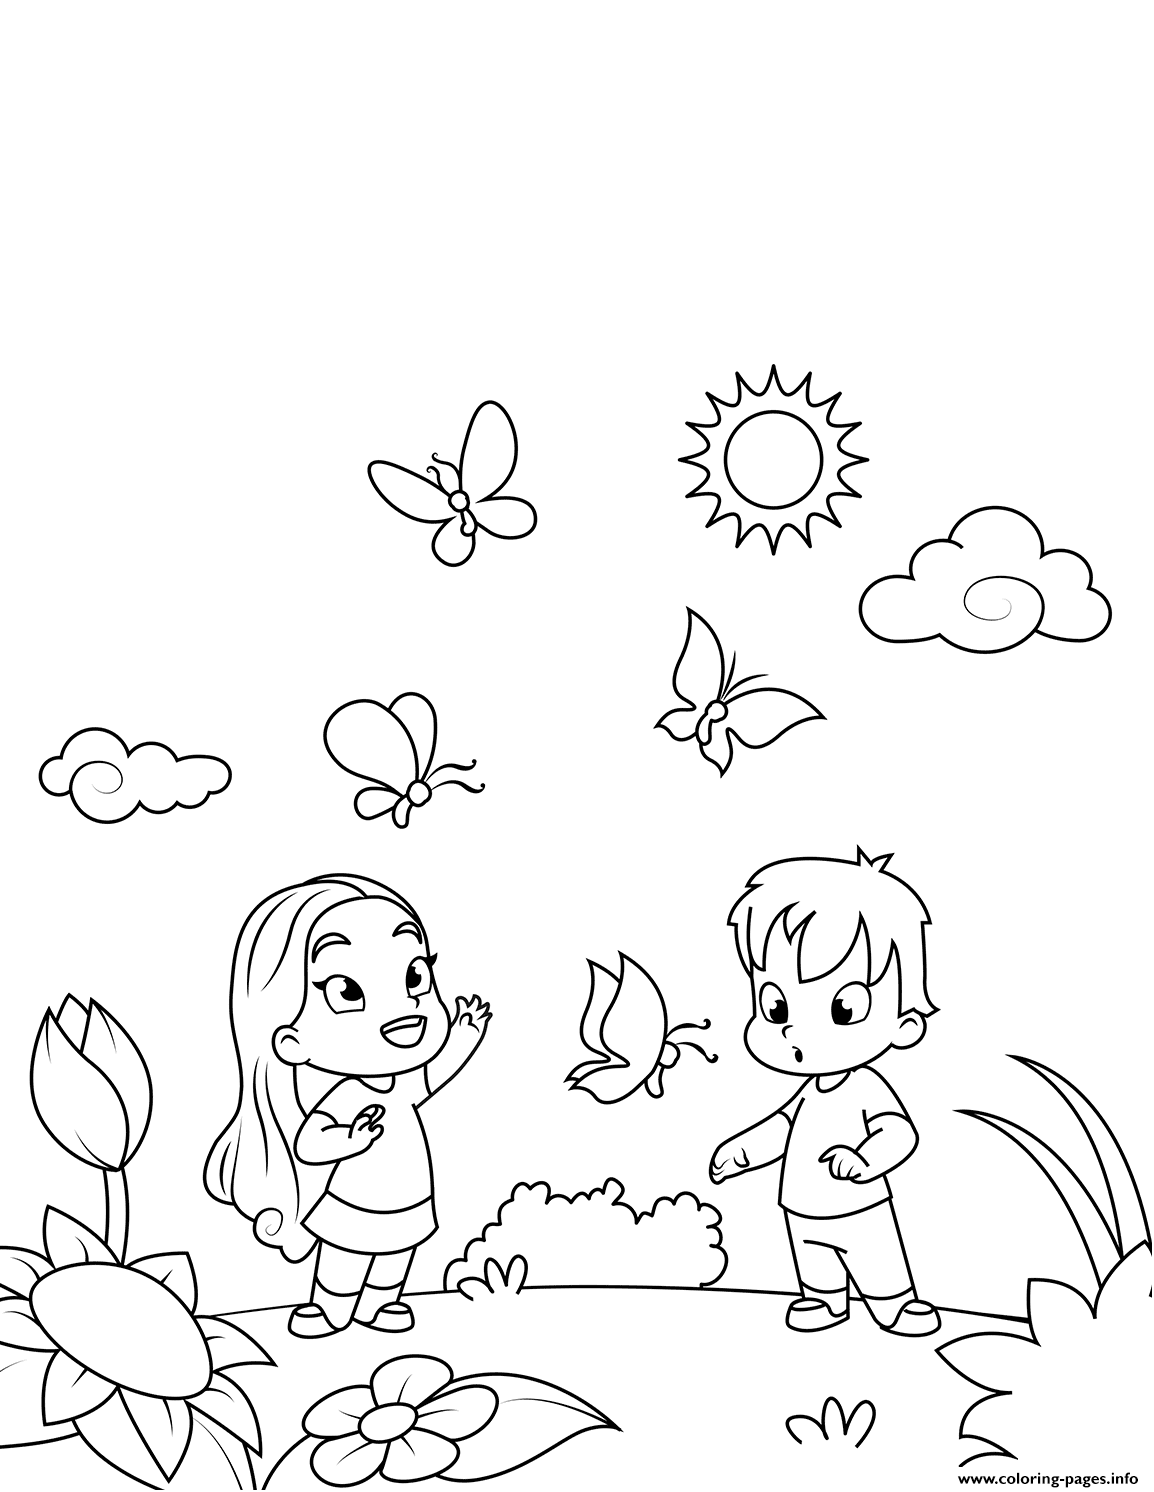 Boy And Girl Admiring Butterflies coloring